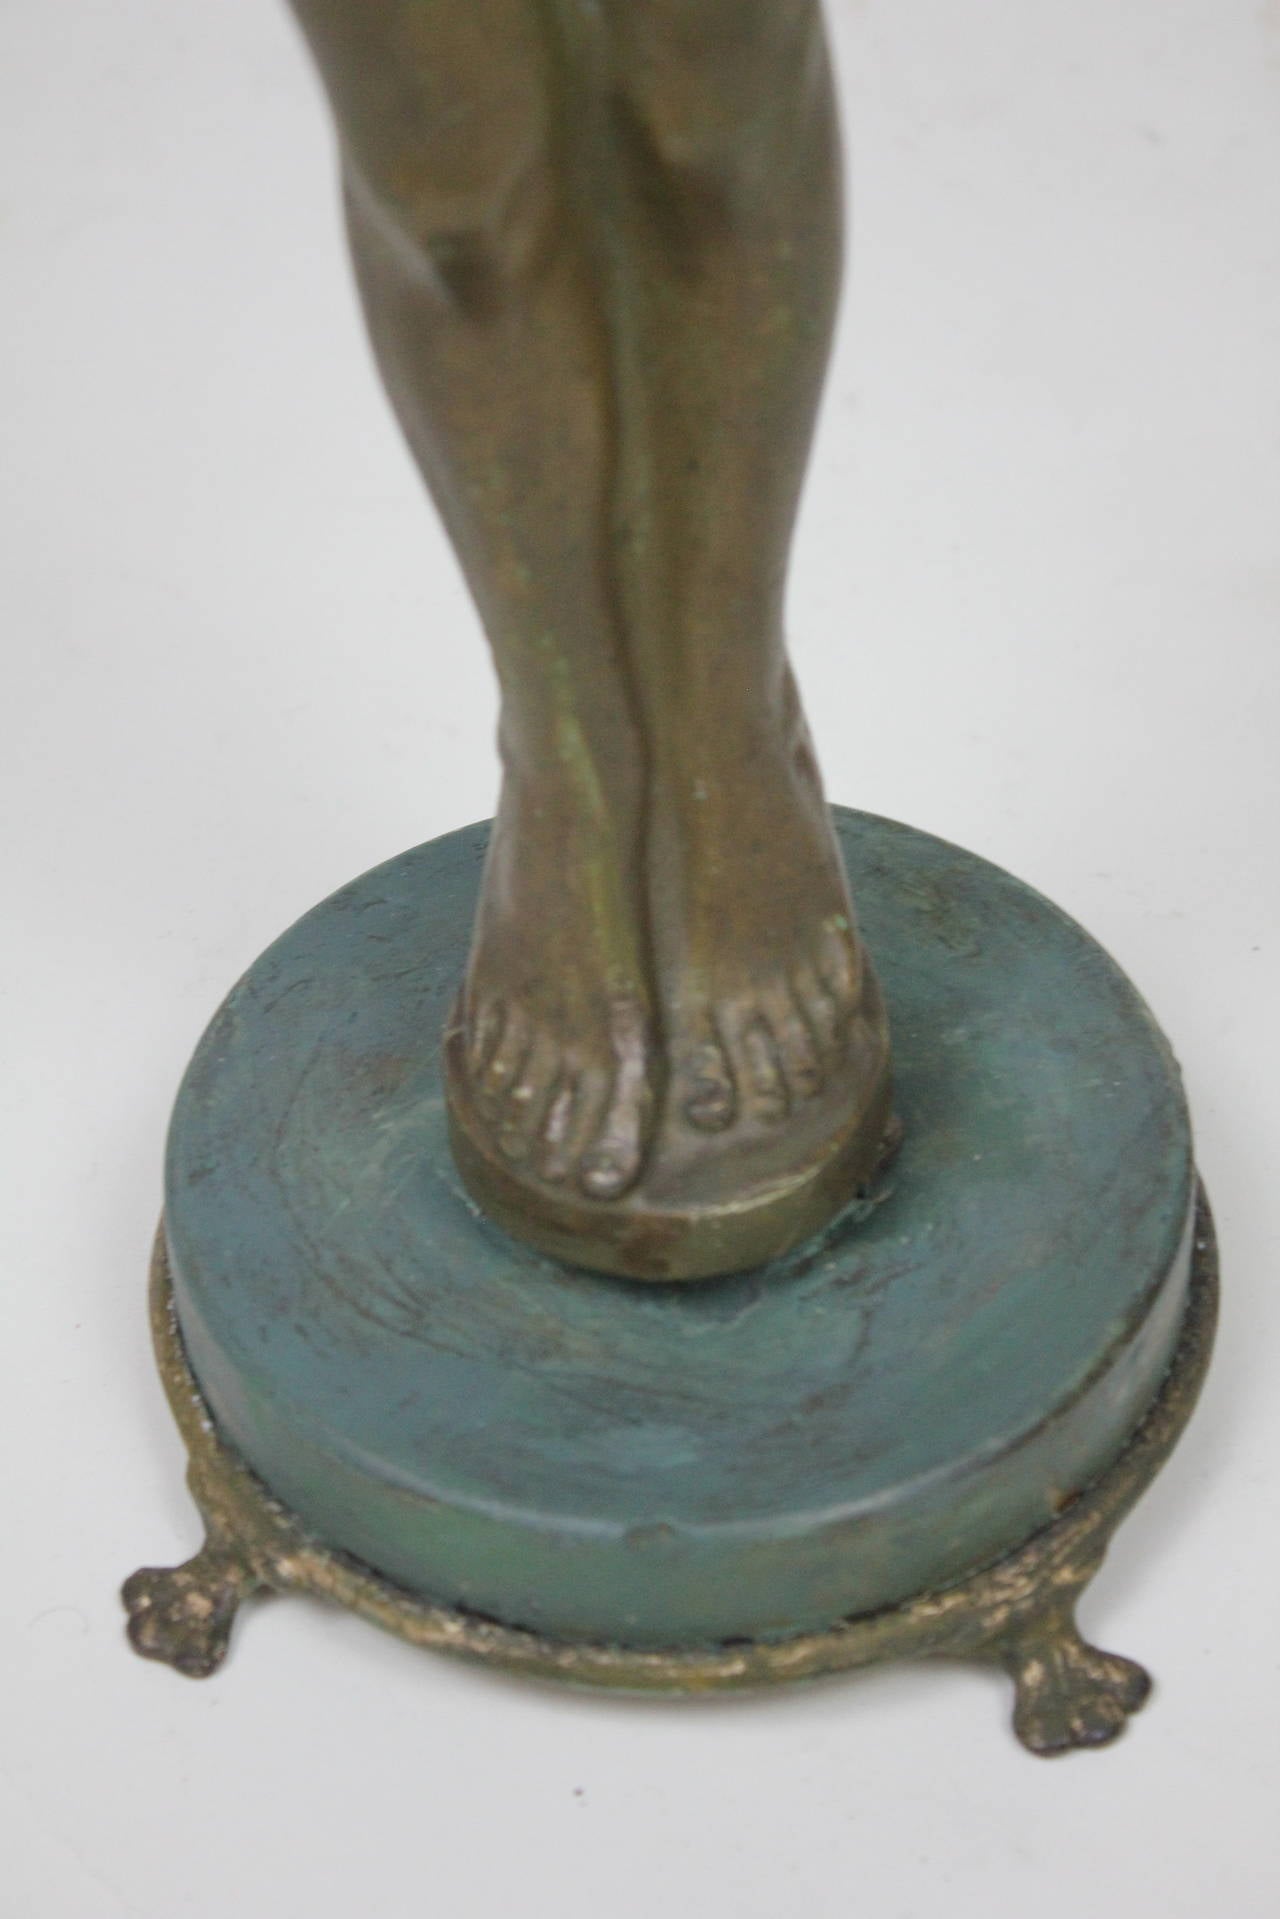 Polychromed Art Deco Lady Statue in the Manner of Max Le Verrier by Everlite N.Y., 1930 For Sale